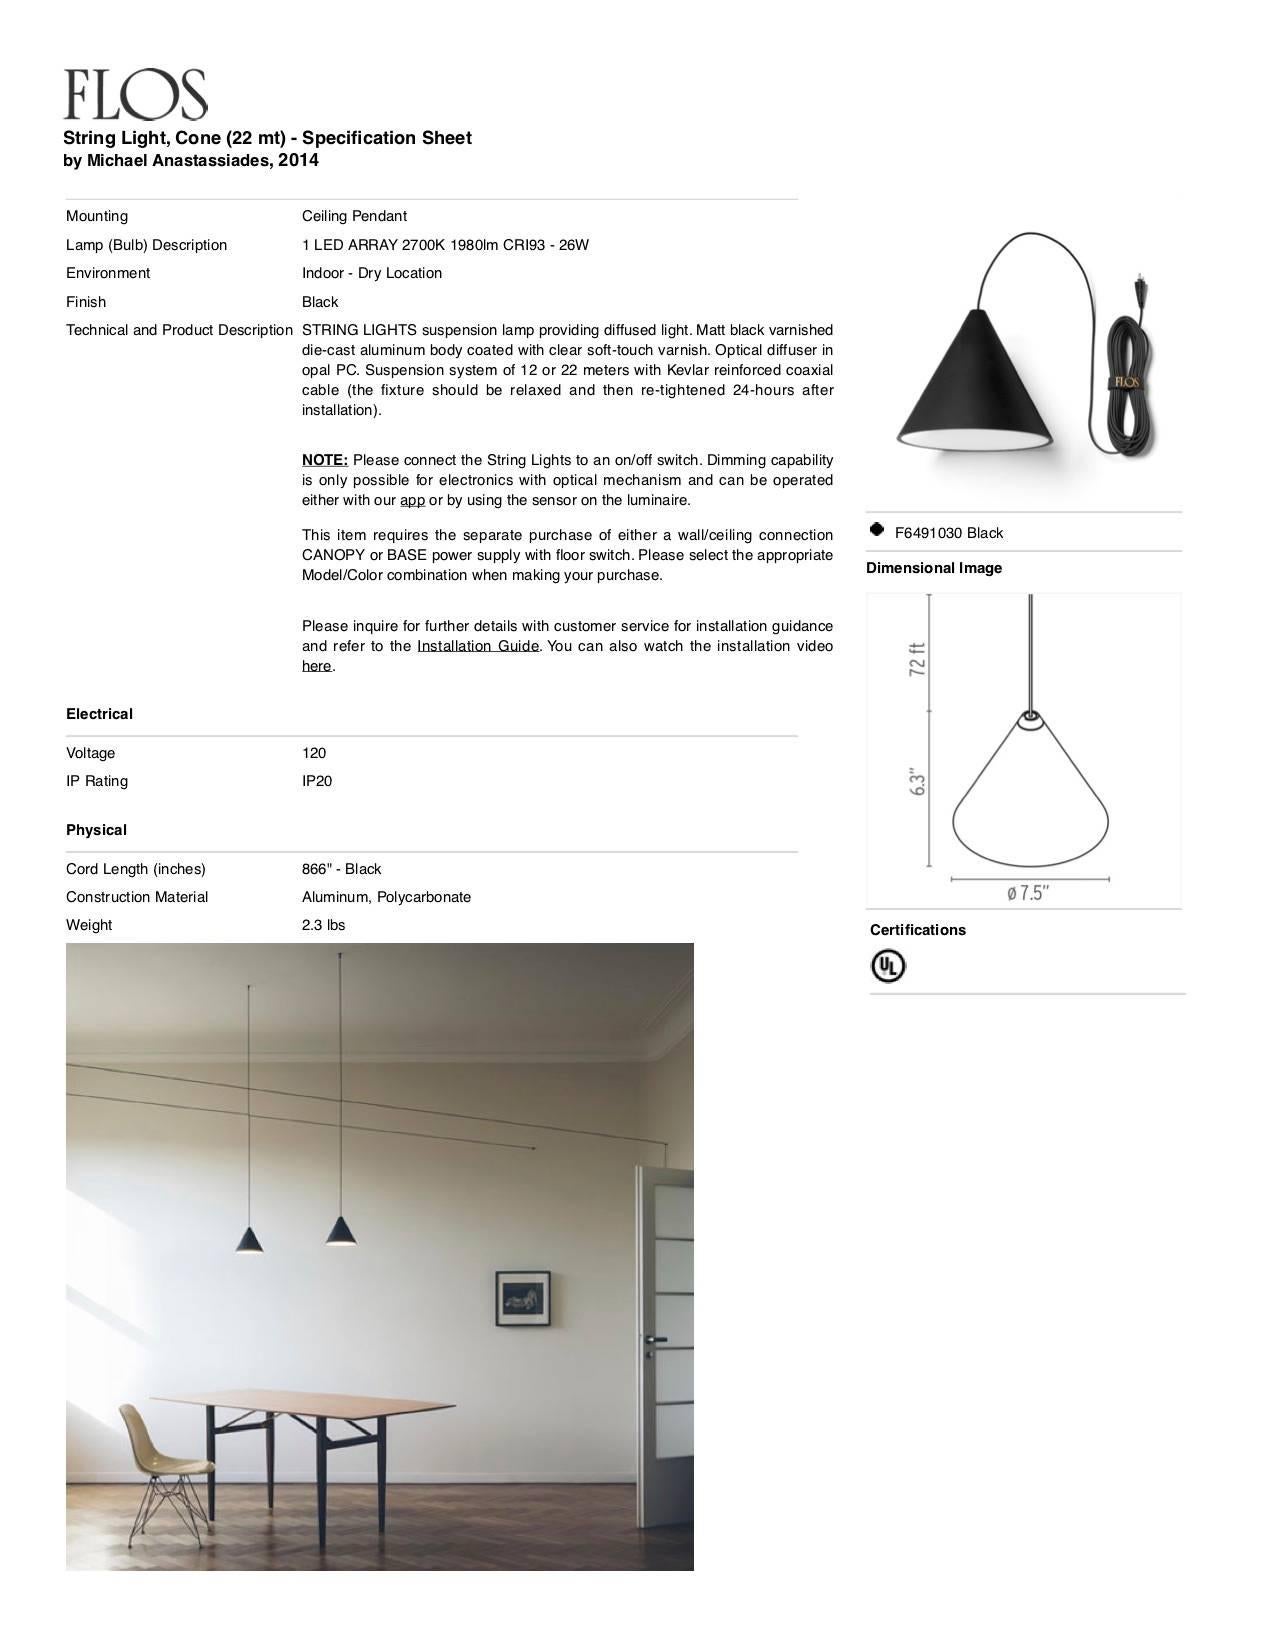 Aluminum Flos Cone String Light with Canopy by Michael Anastassiades